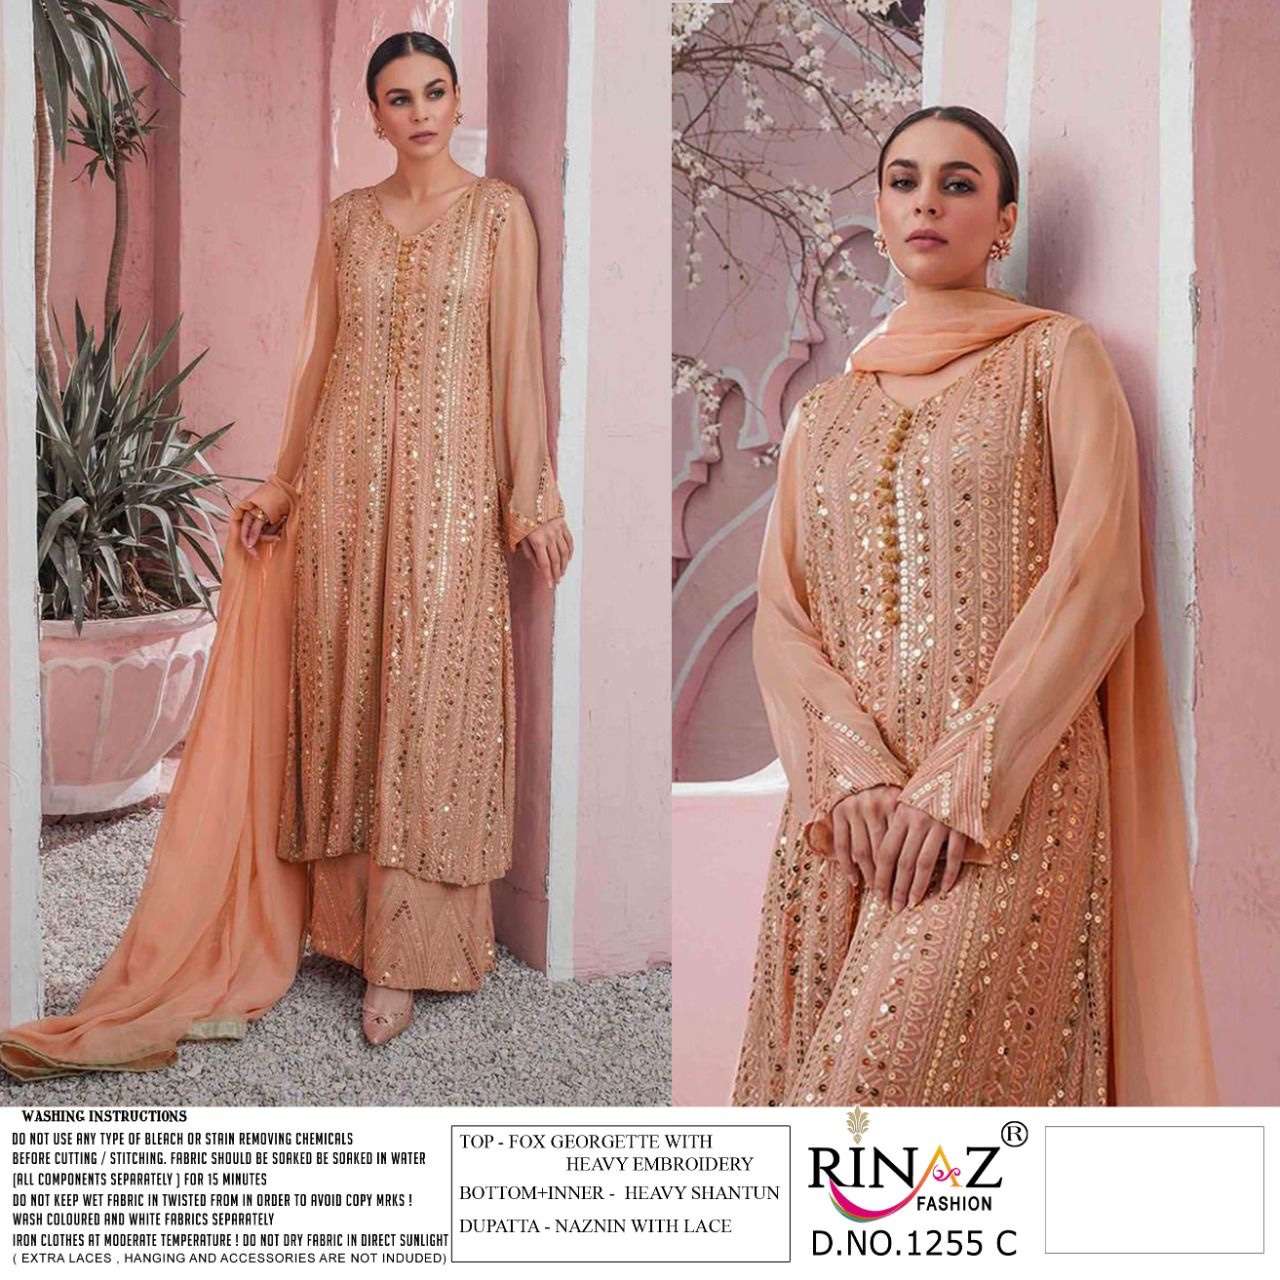 Rinaz fashion 1255 colors faux georgette with embroidery wor...